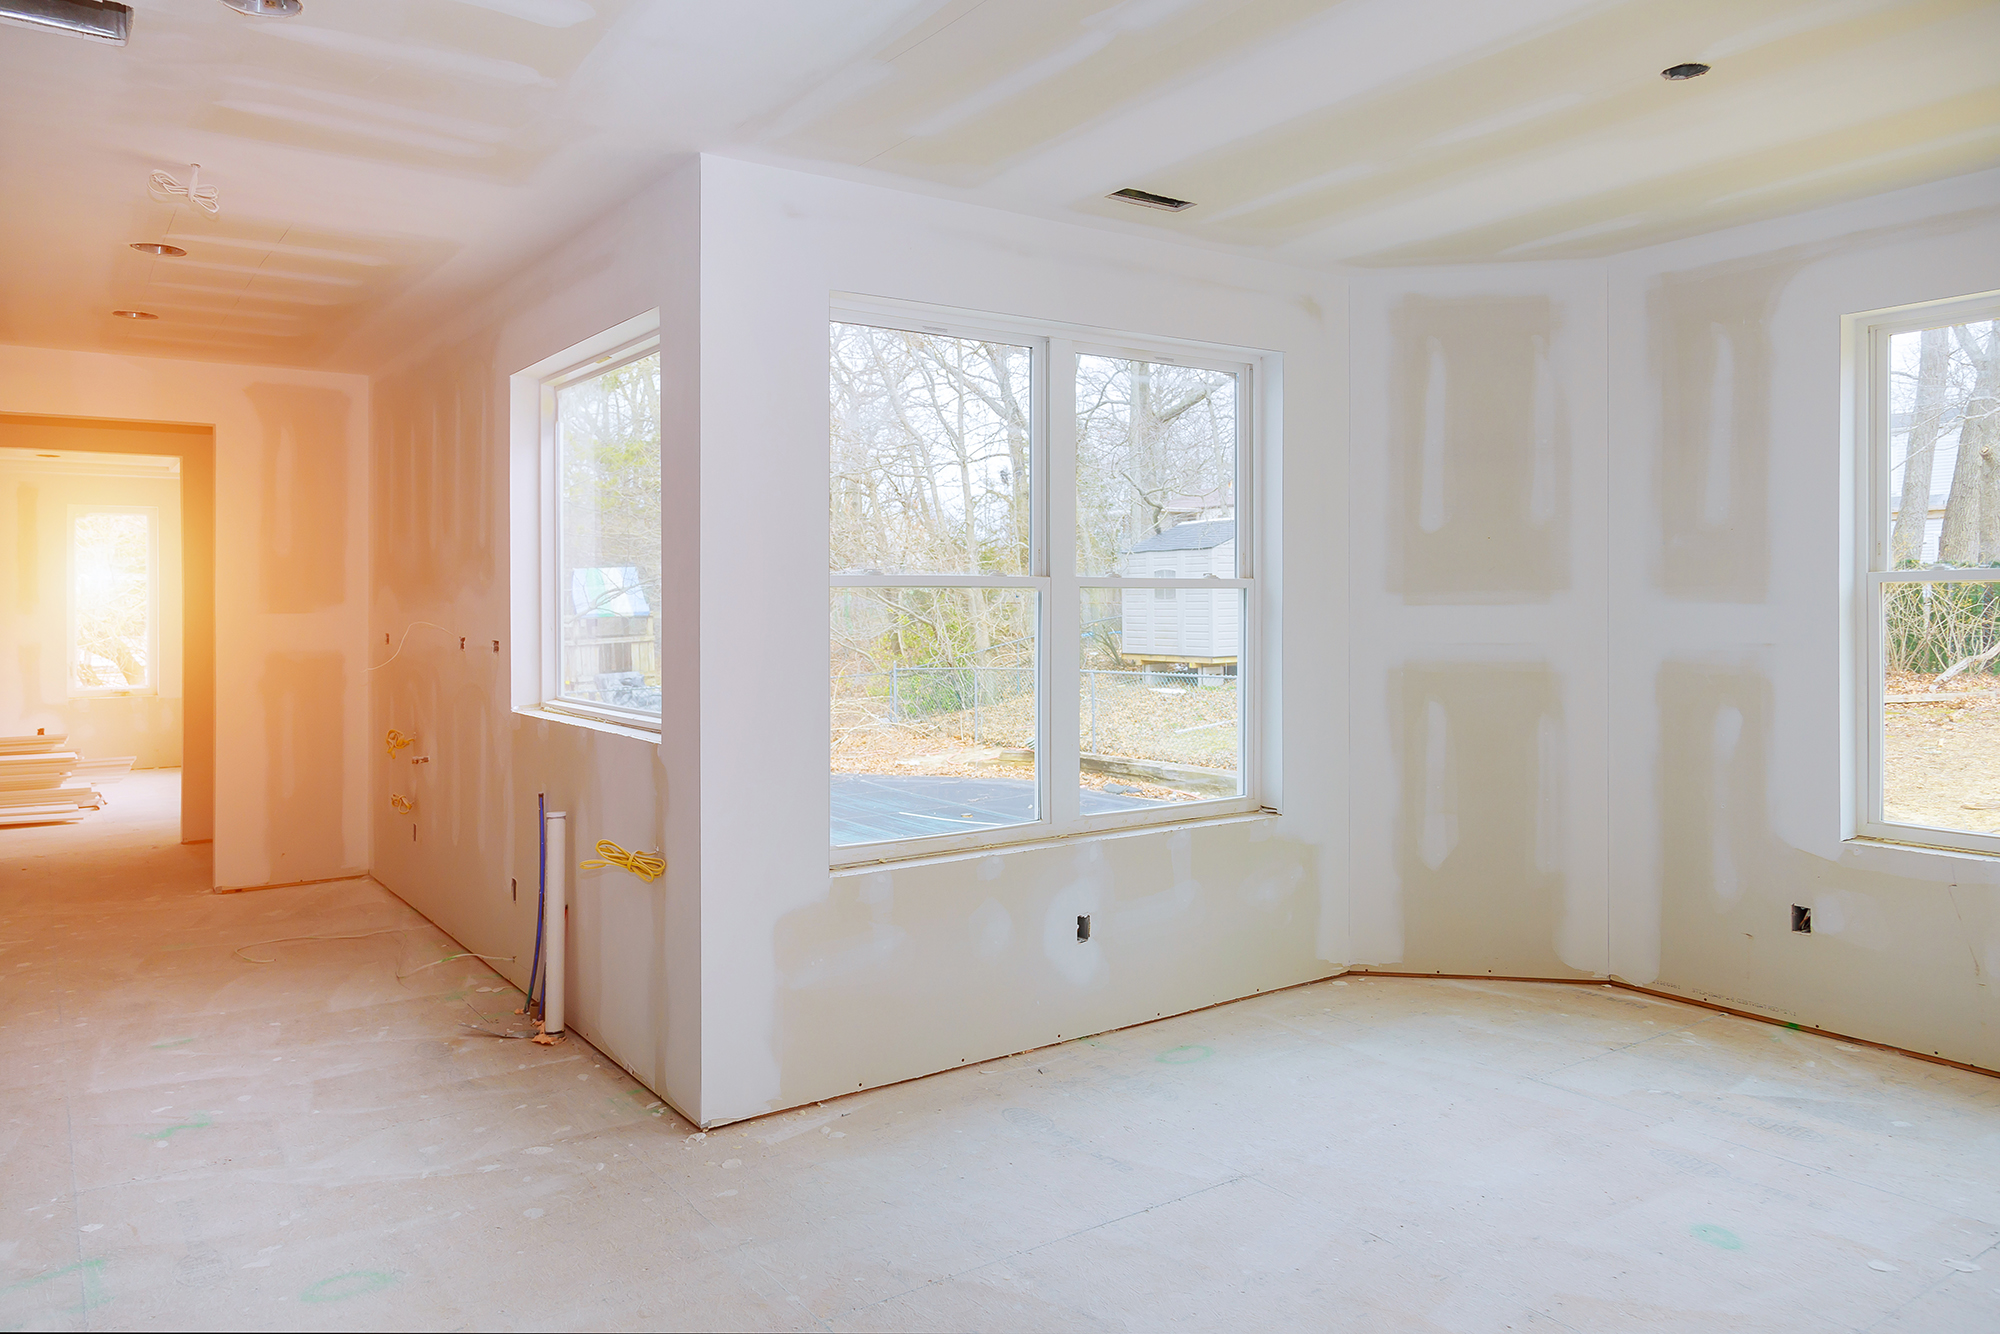 Reliable General Contractor For Residential Or Commercial Renovations | Mr. Drywall Repairs and Remodeling